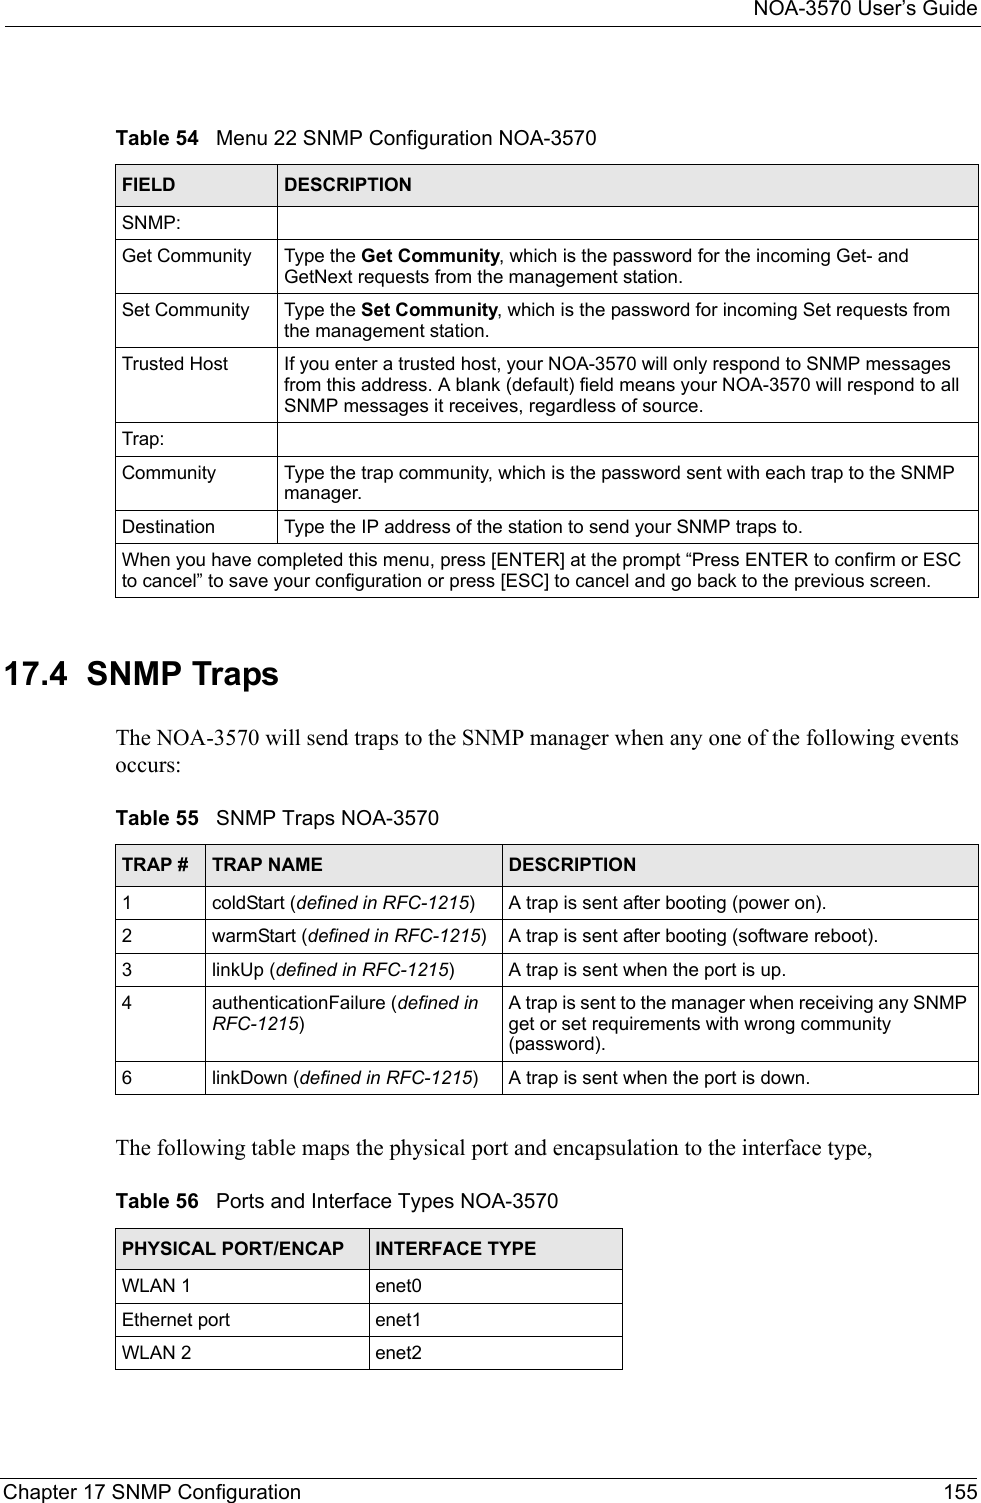 NOA-3570 User’s GuideChapter 17 SNMP Configuration 15517.4  SNMP Traps The NOA-3570 will send traps to the SNMP manager when any one of the following events occurs:The following table maps the physical port and encapsulation to the interface type,Table 54   Menu 22 SNMP Configuration NOA-3570FIELD DESCRIPTIONSNMP:Get Community Type the Get Community, which is the password for the incoming Get- and GetNext requests from the management station.Set Community Type the Set Community, which is the password for incoming Set requests from the management station. Trusted Host If you enter a trusted host, your NOA-3570 will only respond to SNMP messages from this address. A blank (default) field means your NOA-3570 will respond to all SNMP messages it receives, regardless of source.Trap:Community Type the trap community, which is the password sent with each trap to the SNMP manager. Destination Type the IP address of the station to send your SNMP traps to.When you have completed this menu, press [ENTER] at the prompt “Press ENTER to confirm or ESC to cancel” to save your configuration or press [ESC] to cancel and go back to the previous screen.Table 55   SNMP Traps NOA-3570TRAP # TRAP NAME DESCRIPTION1coldStart (defined in RFC-1215)A trap is sent after booting (power on).2warmStart (defined in RFC-1215)A trap is sent after booting (software reboot).3linkUp (defined in RFC-1215)A trap is sent when the port is up.4authenticationFailure (defined in RFC-1215)A trap is sent to the manager when receiving any SNMP get or set requirements with wrong community (password).6linkDown (defined in RFC-1215)A trap is sent when the port is down.Table 56   Ports and Interface Types NOA-3570PHYSICAL PORT/ENCAP INTERFACE TYPEWLAN 1  enet0Ethernet port enet1     WLAN 2 enet2